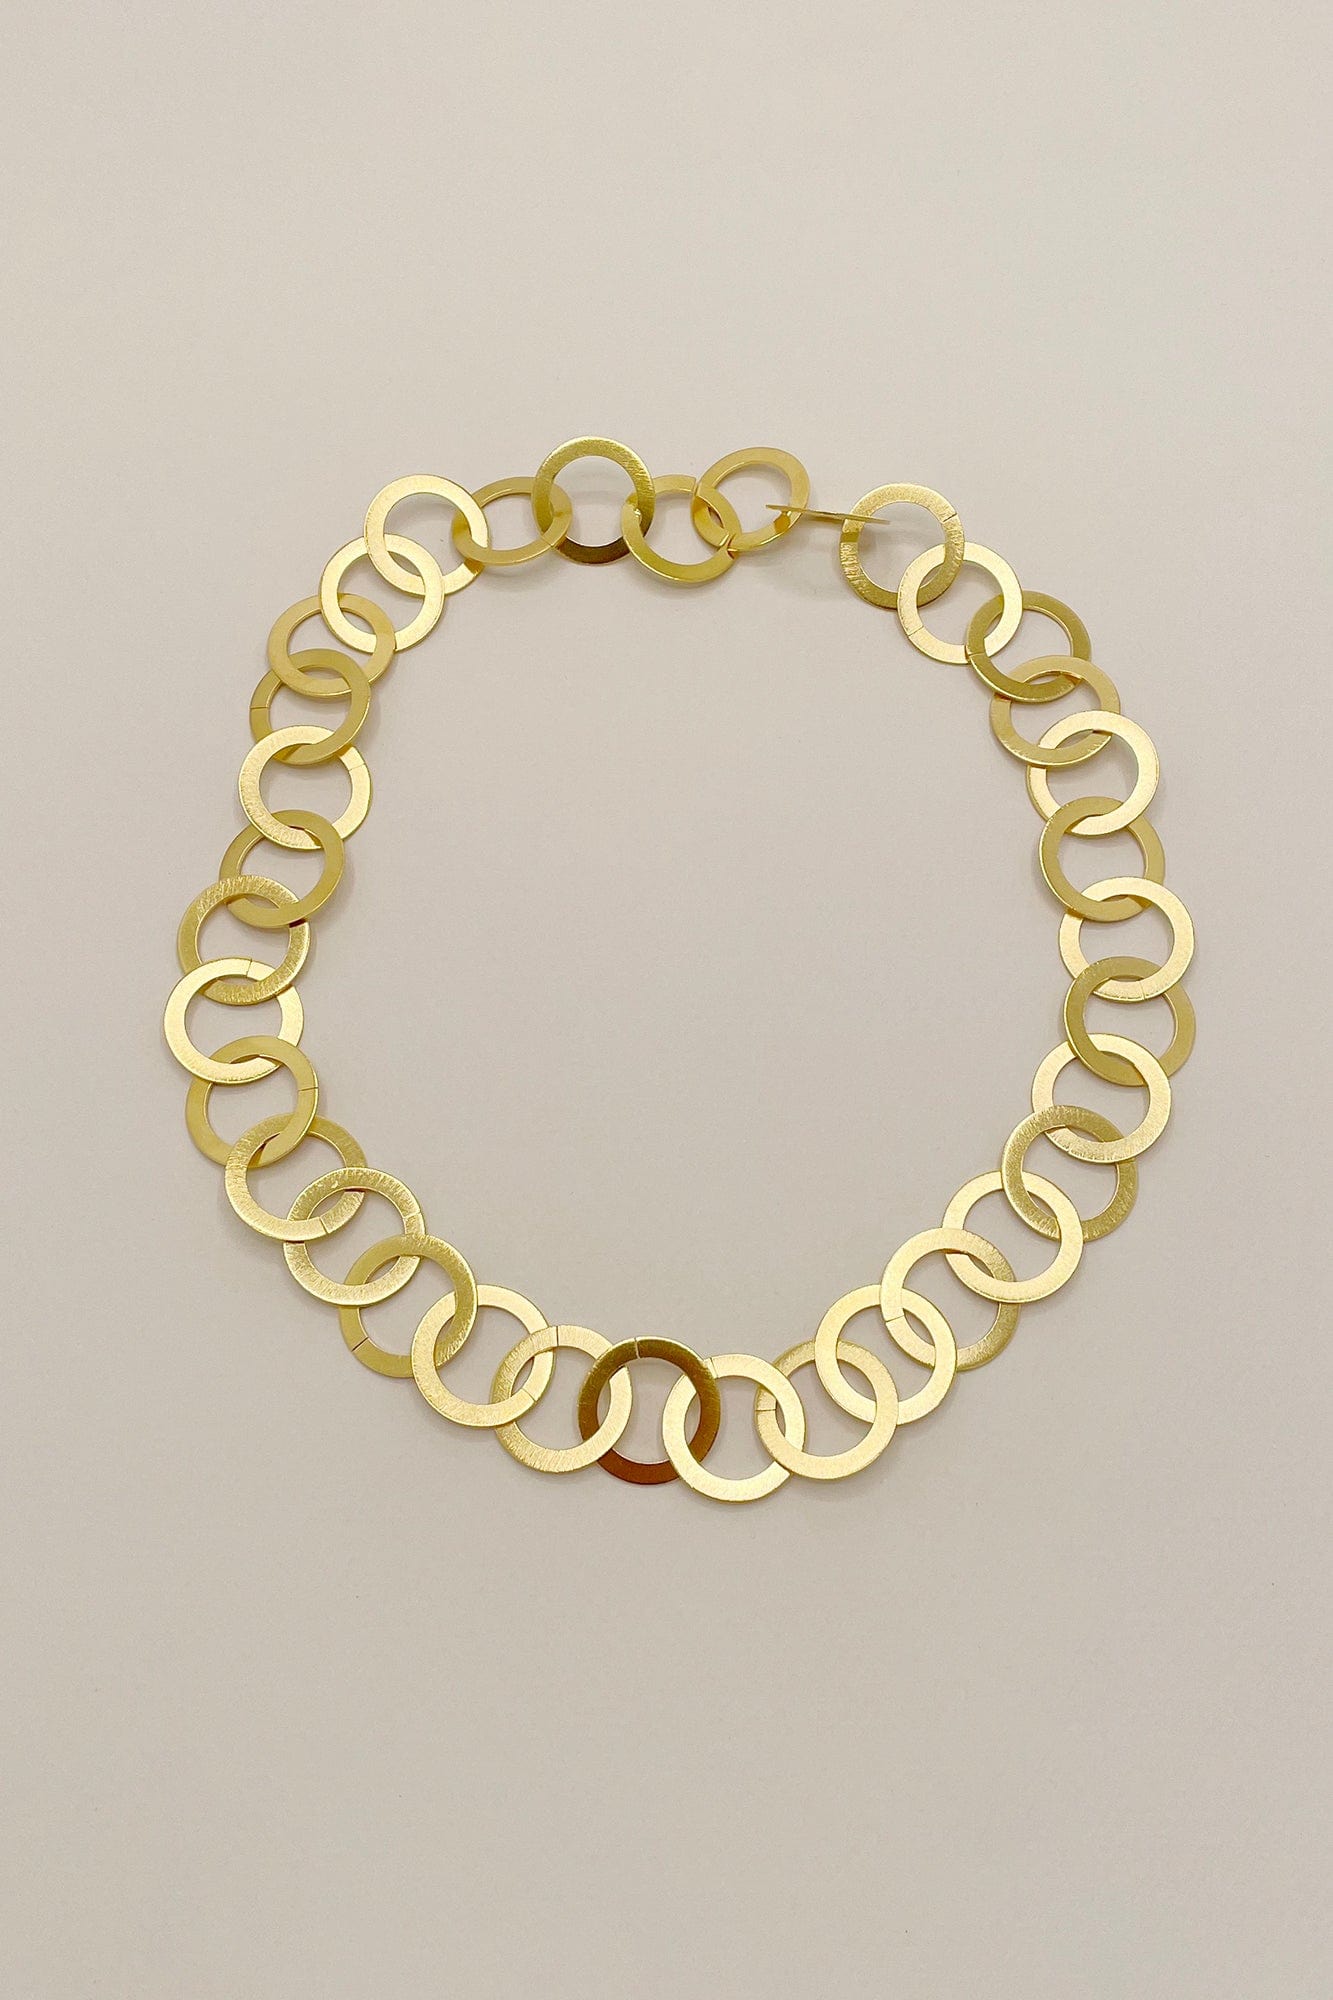 Circle Link Chain Necklace - Gold Plated AR.M ANNA ROSA MOSCHOUTI